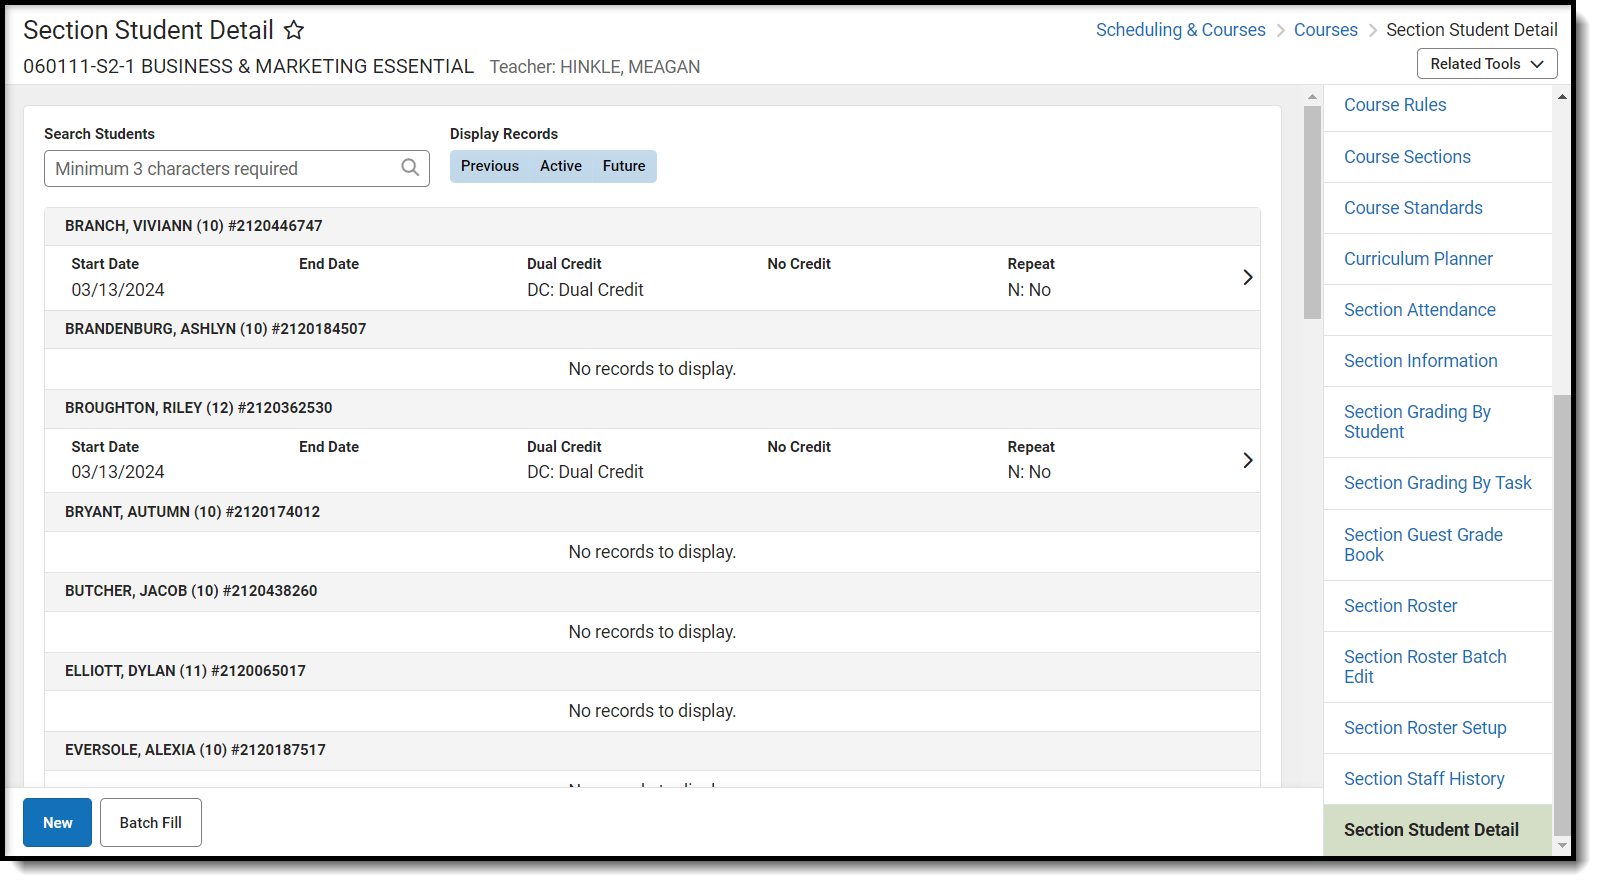 Screenshot of the Section Student Detail tool.